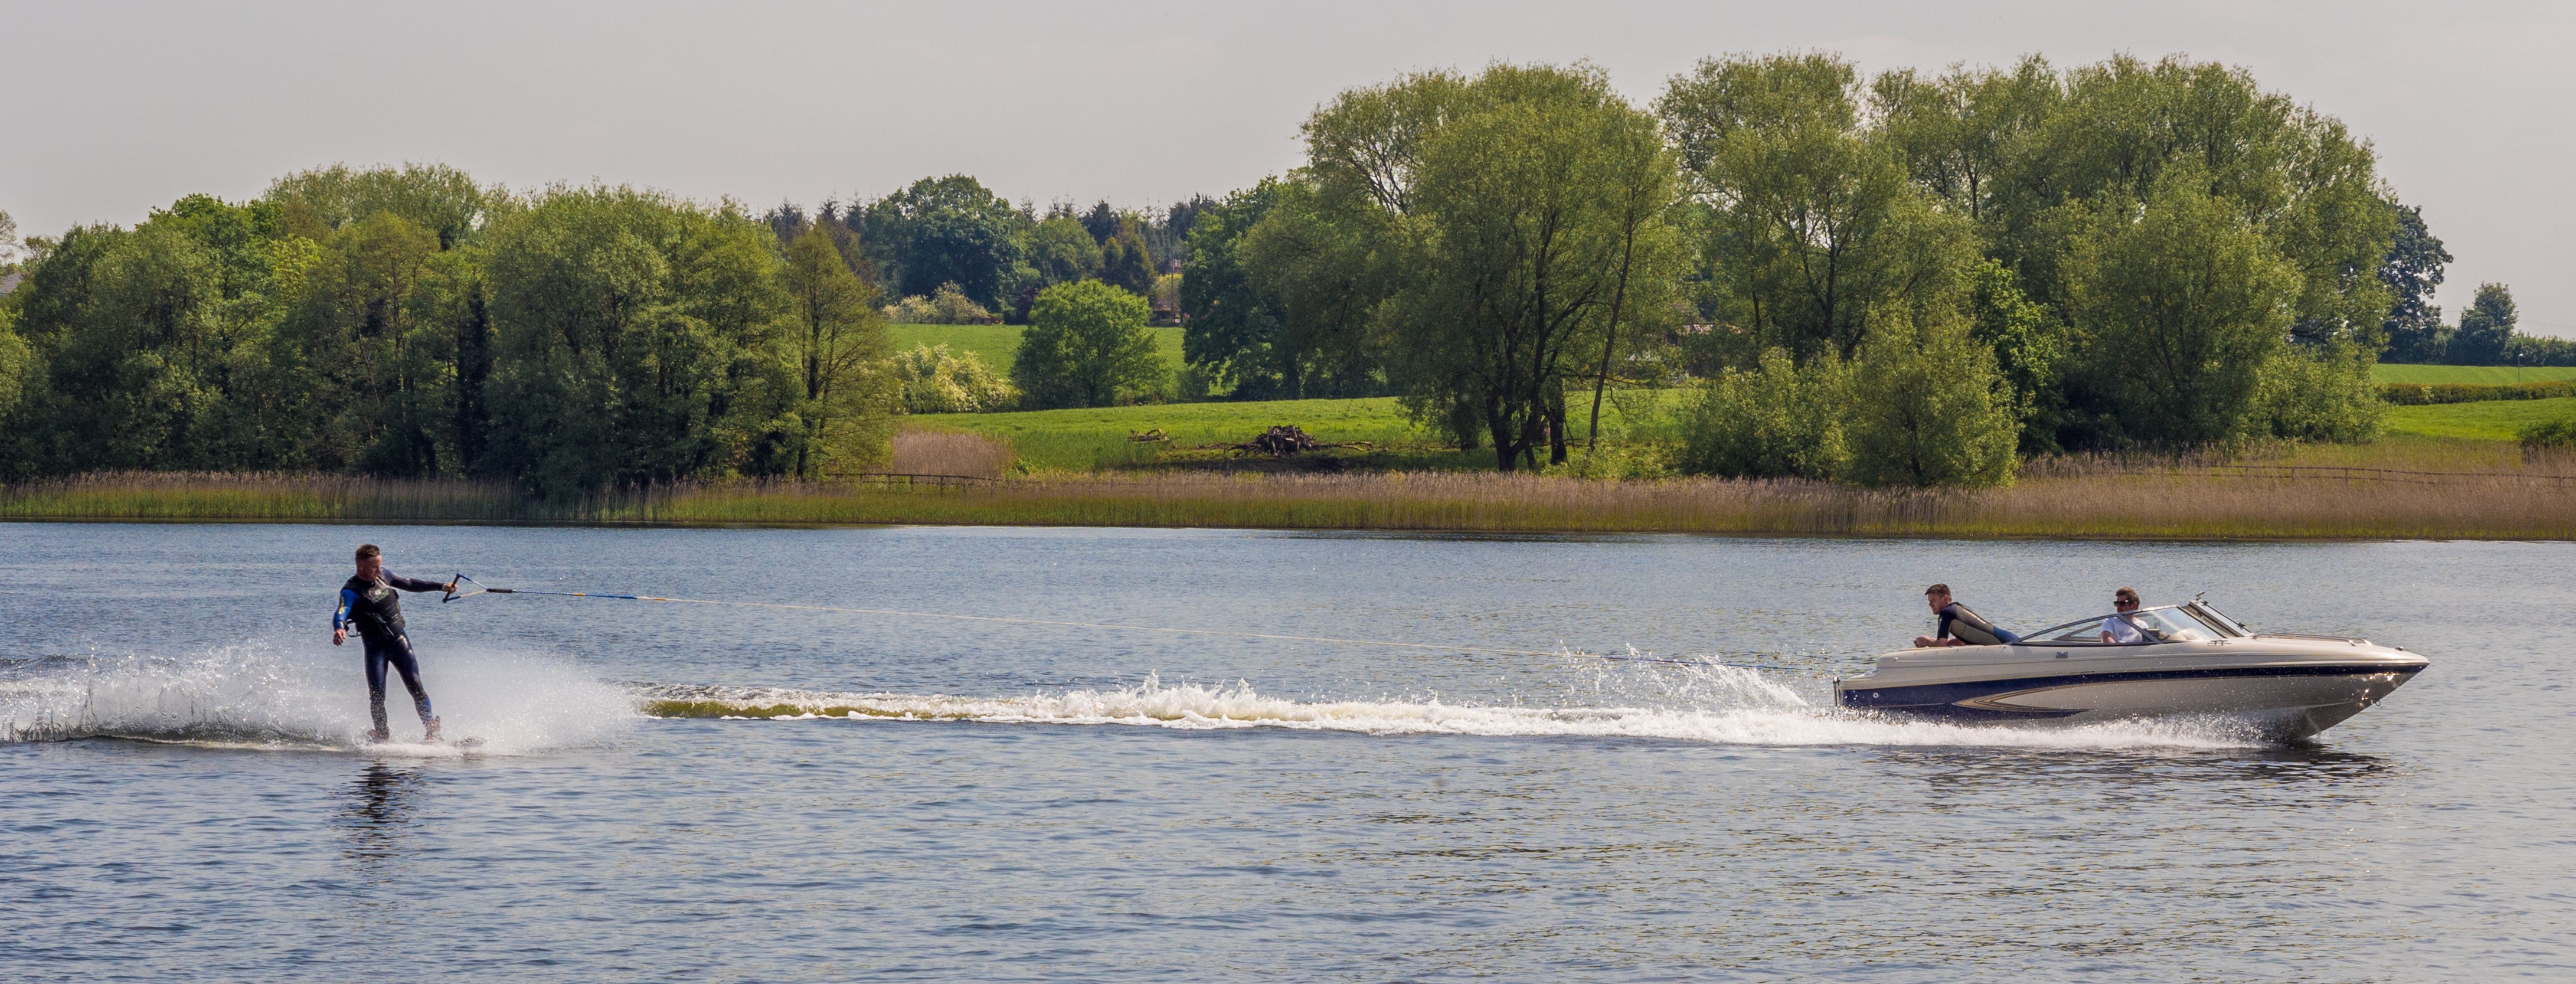 Pickmere,,cheshire,,uk.,may,19th,2018.,water,skier,practising,their